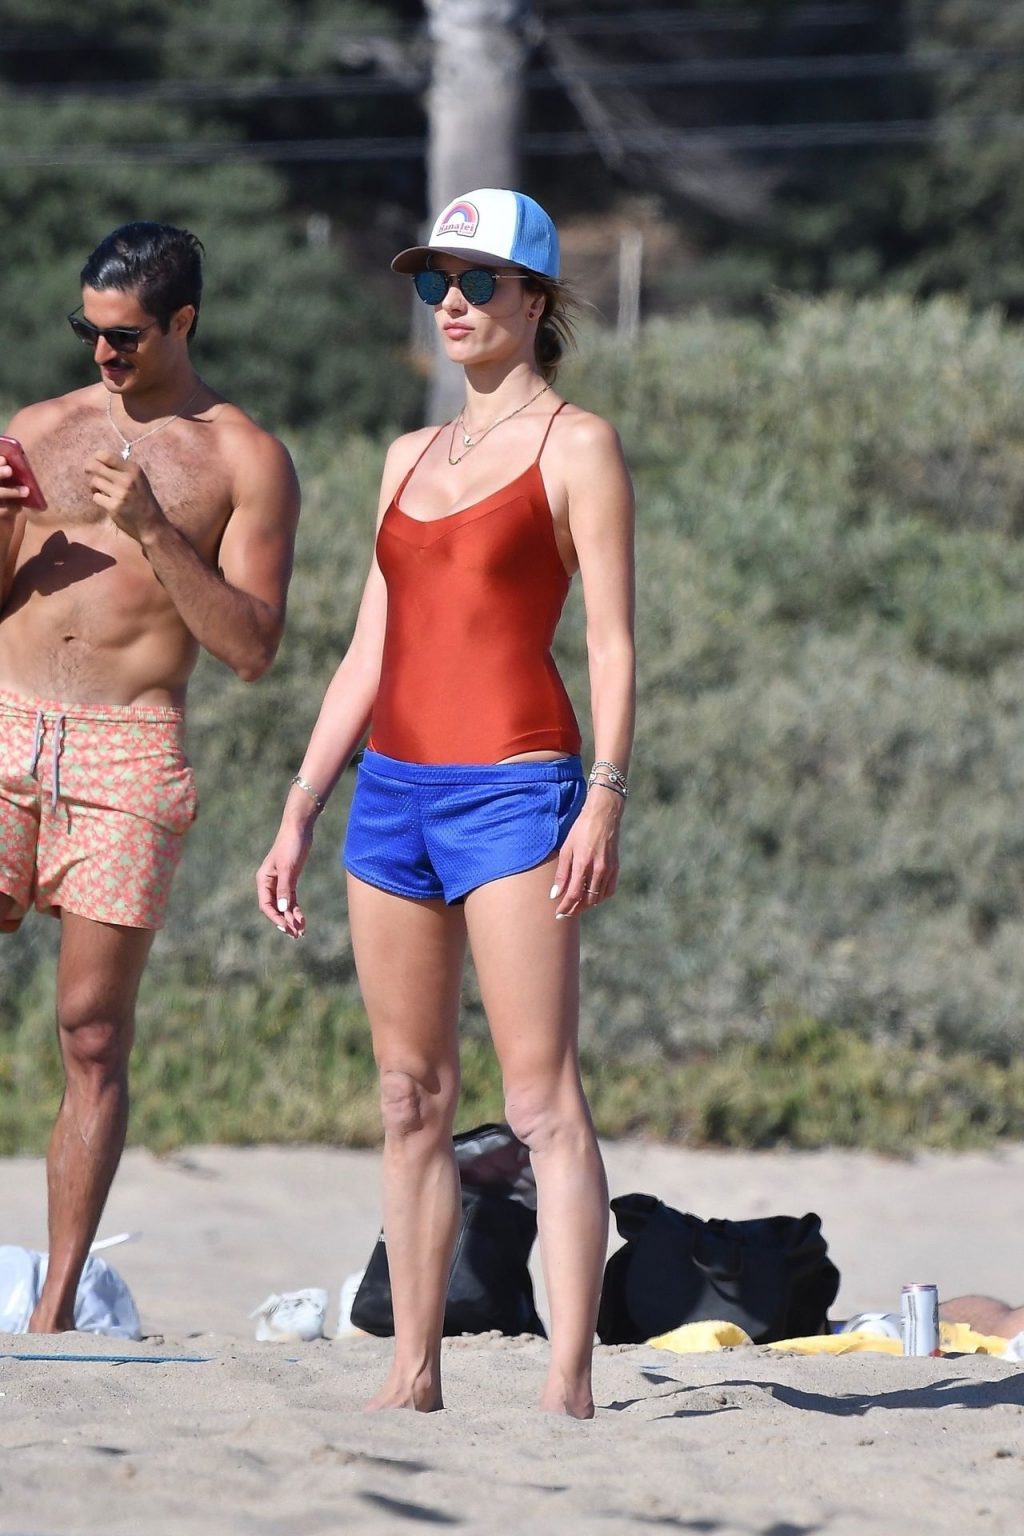 Alessandra Ambrosio Plays Volleyball at the Beach with Friends (70 Photos)